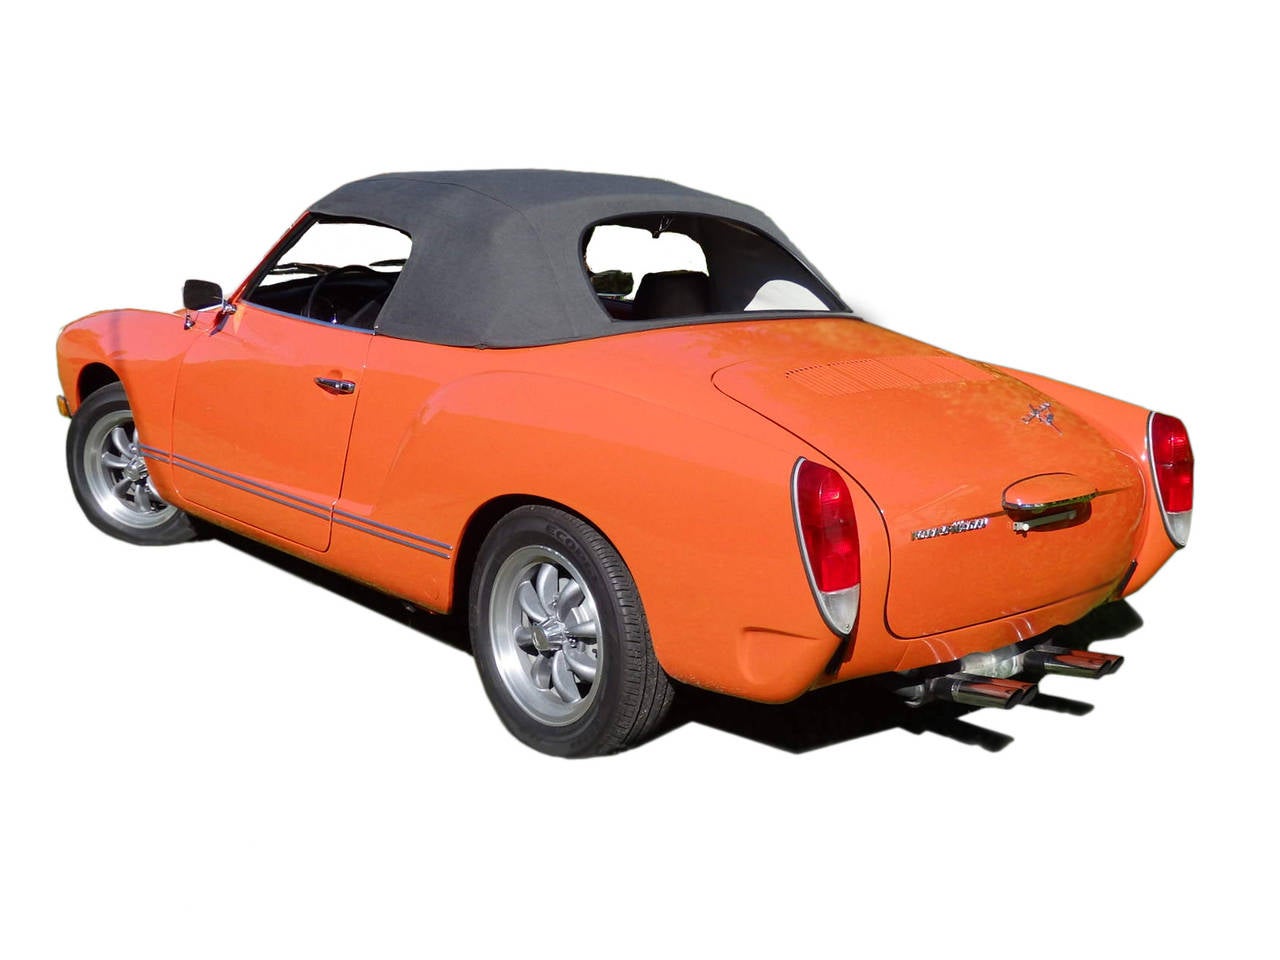 Introduced as a styling concept at the Paris auto show in 1953 the Karmann Ghia has a Karmann hand built body designed by Luigi Segre for Italian coach builder Ghia for VW. Convertible production for 1972 was about 3000 units . This 1972 convert has